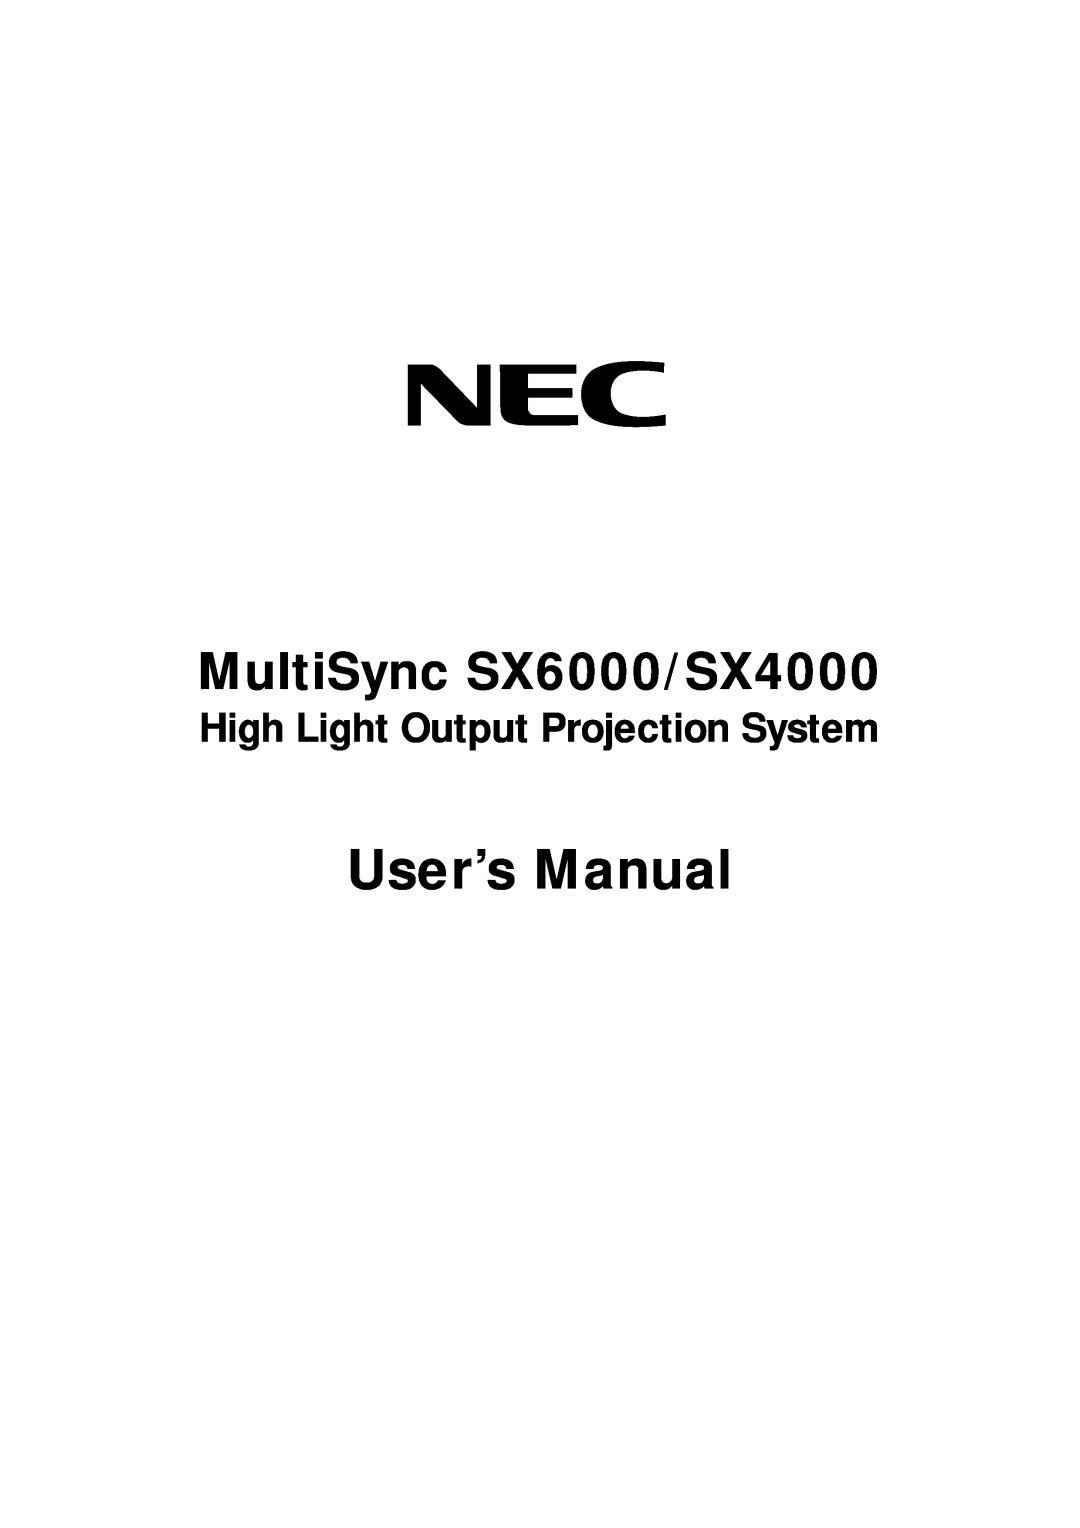 NEC user manual User’s Manual, MultiSync SX6000/SX4000, High Light Output Projection System 